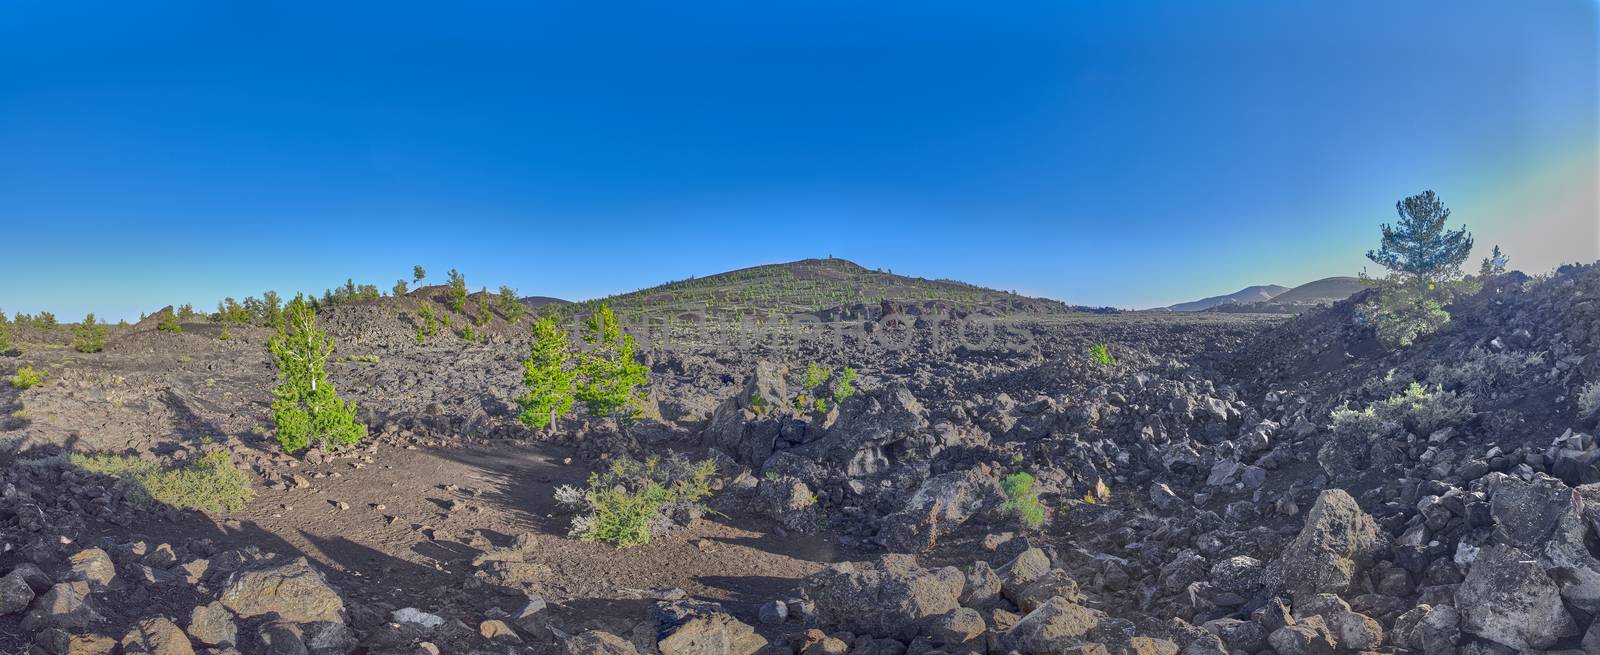 Panorama view of lava field at Crater of the Moon National Park, by patrickstock